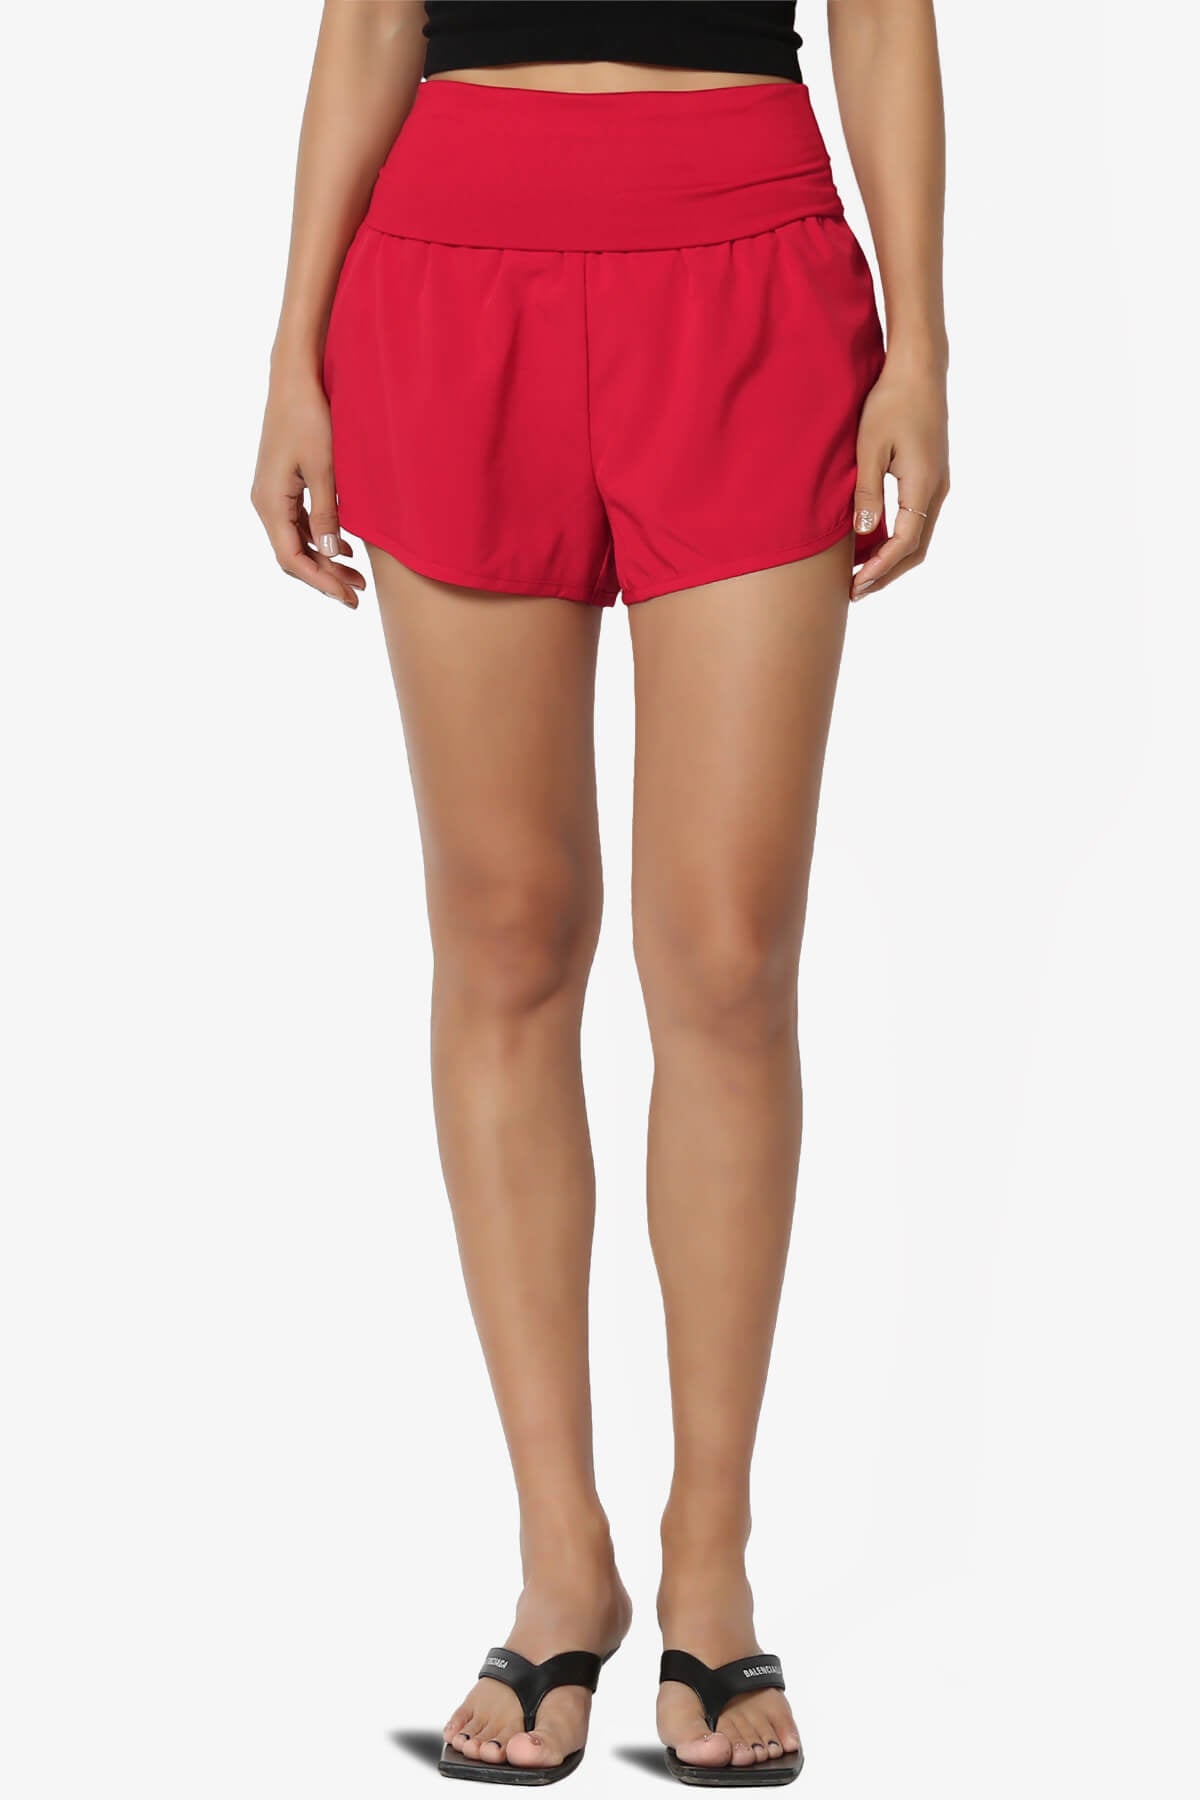 Game Time Foldover High Waist Running Shorts RED_1